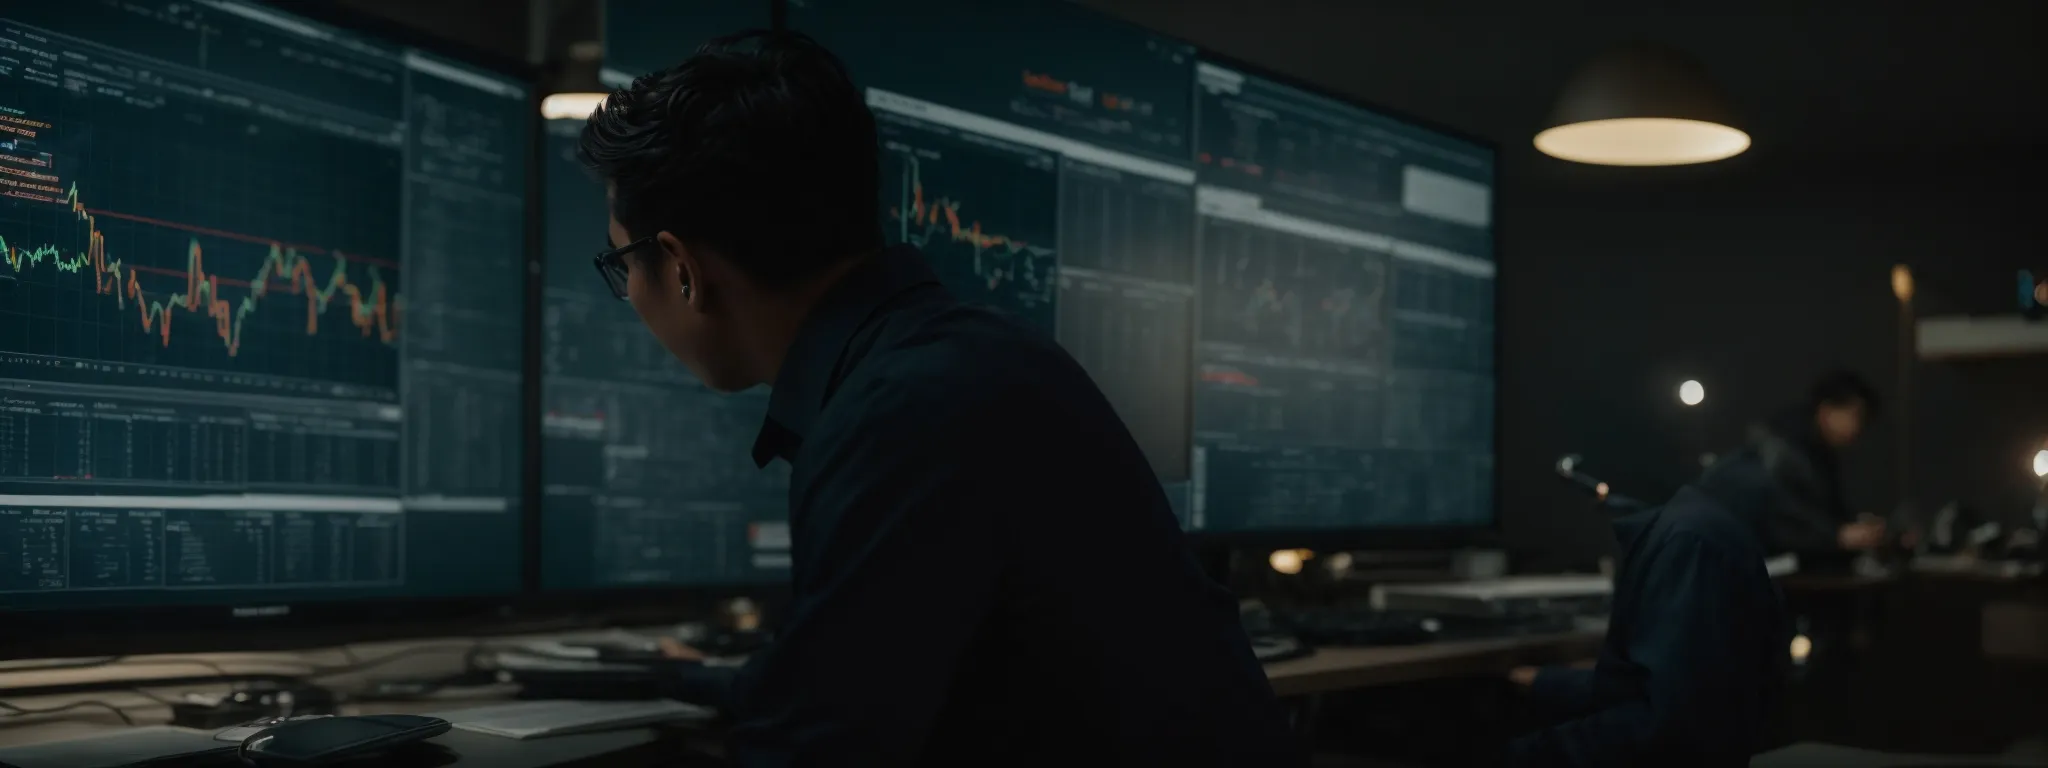 a marketing strategist explores a digital keyword analytics dashboard on a large screen, illuminating their focused expression amidst a dimly lit office.